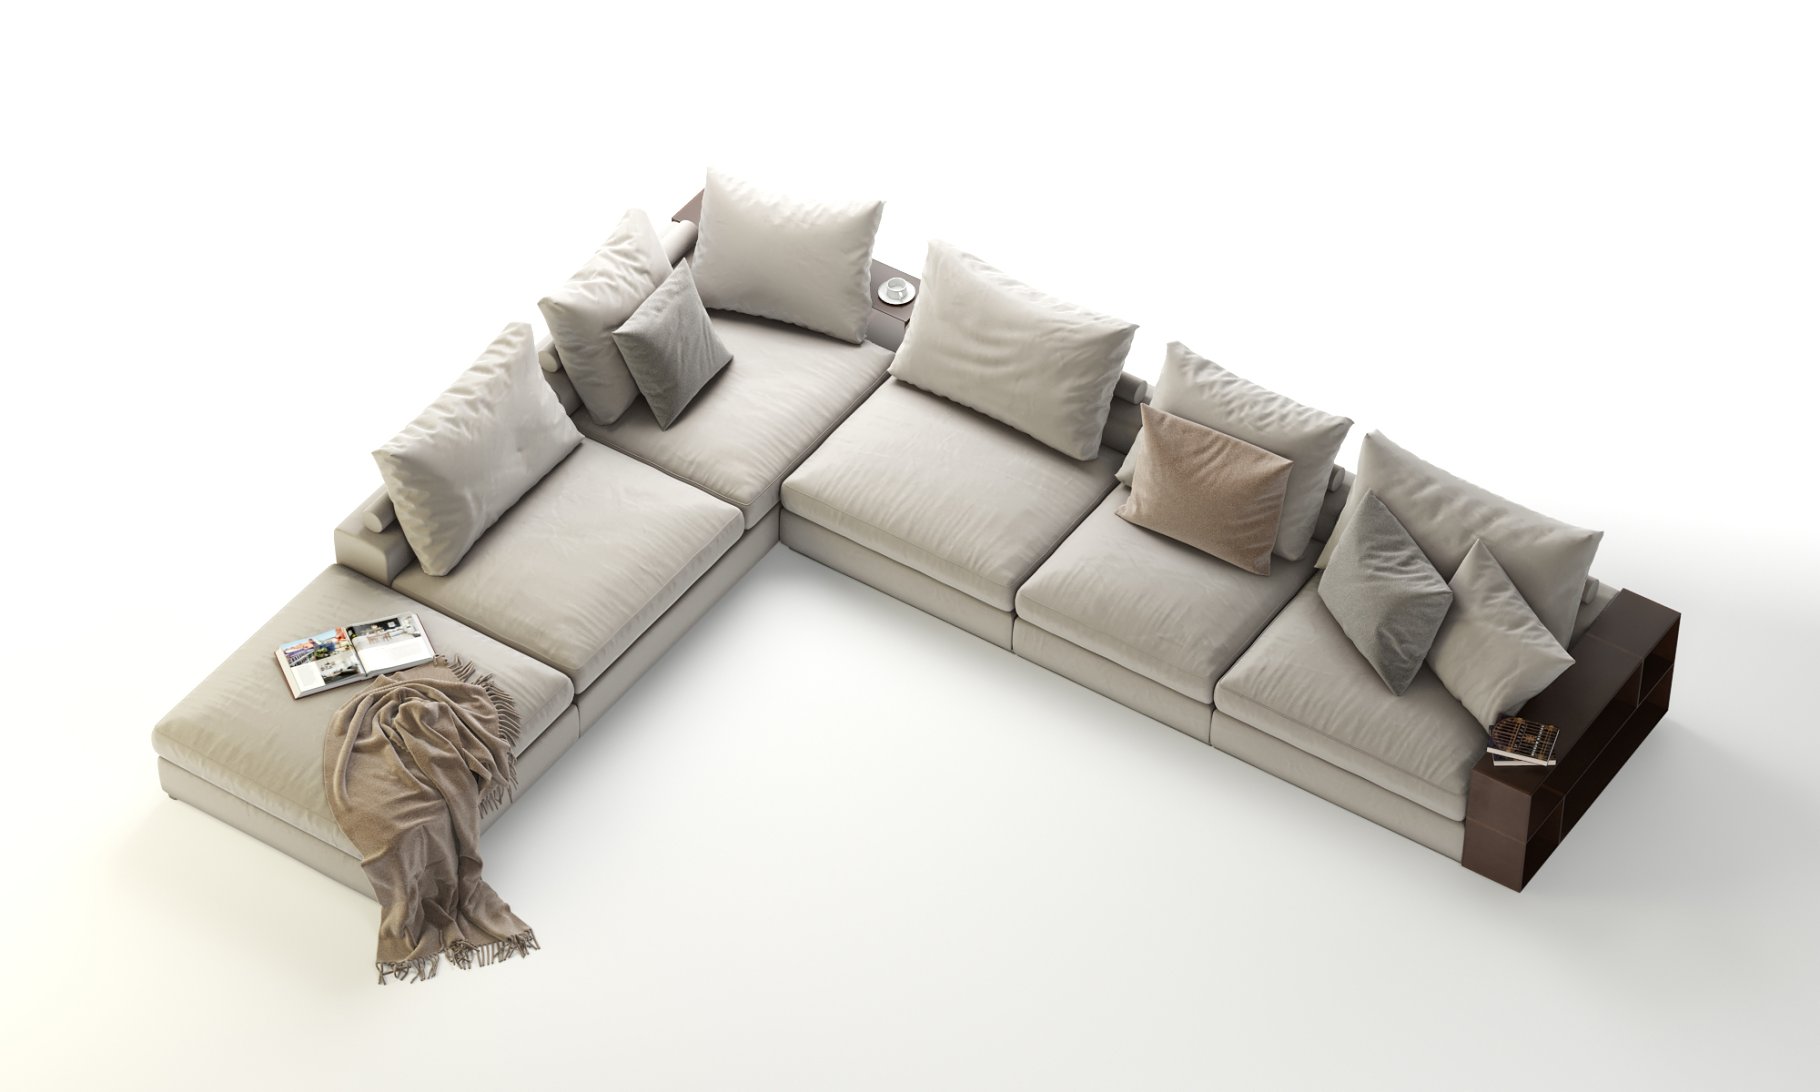 Images of a unique 3d model of a corner sectional sofa top view